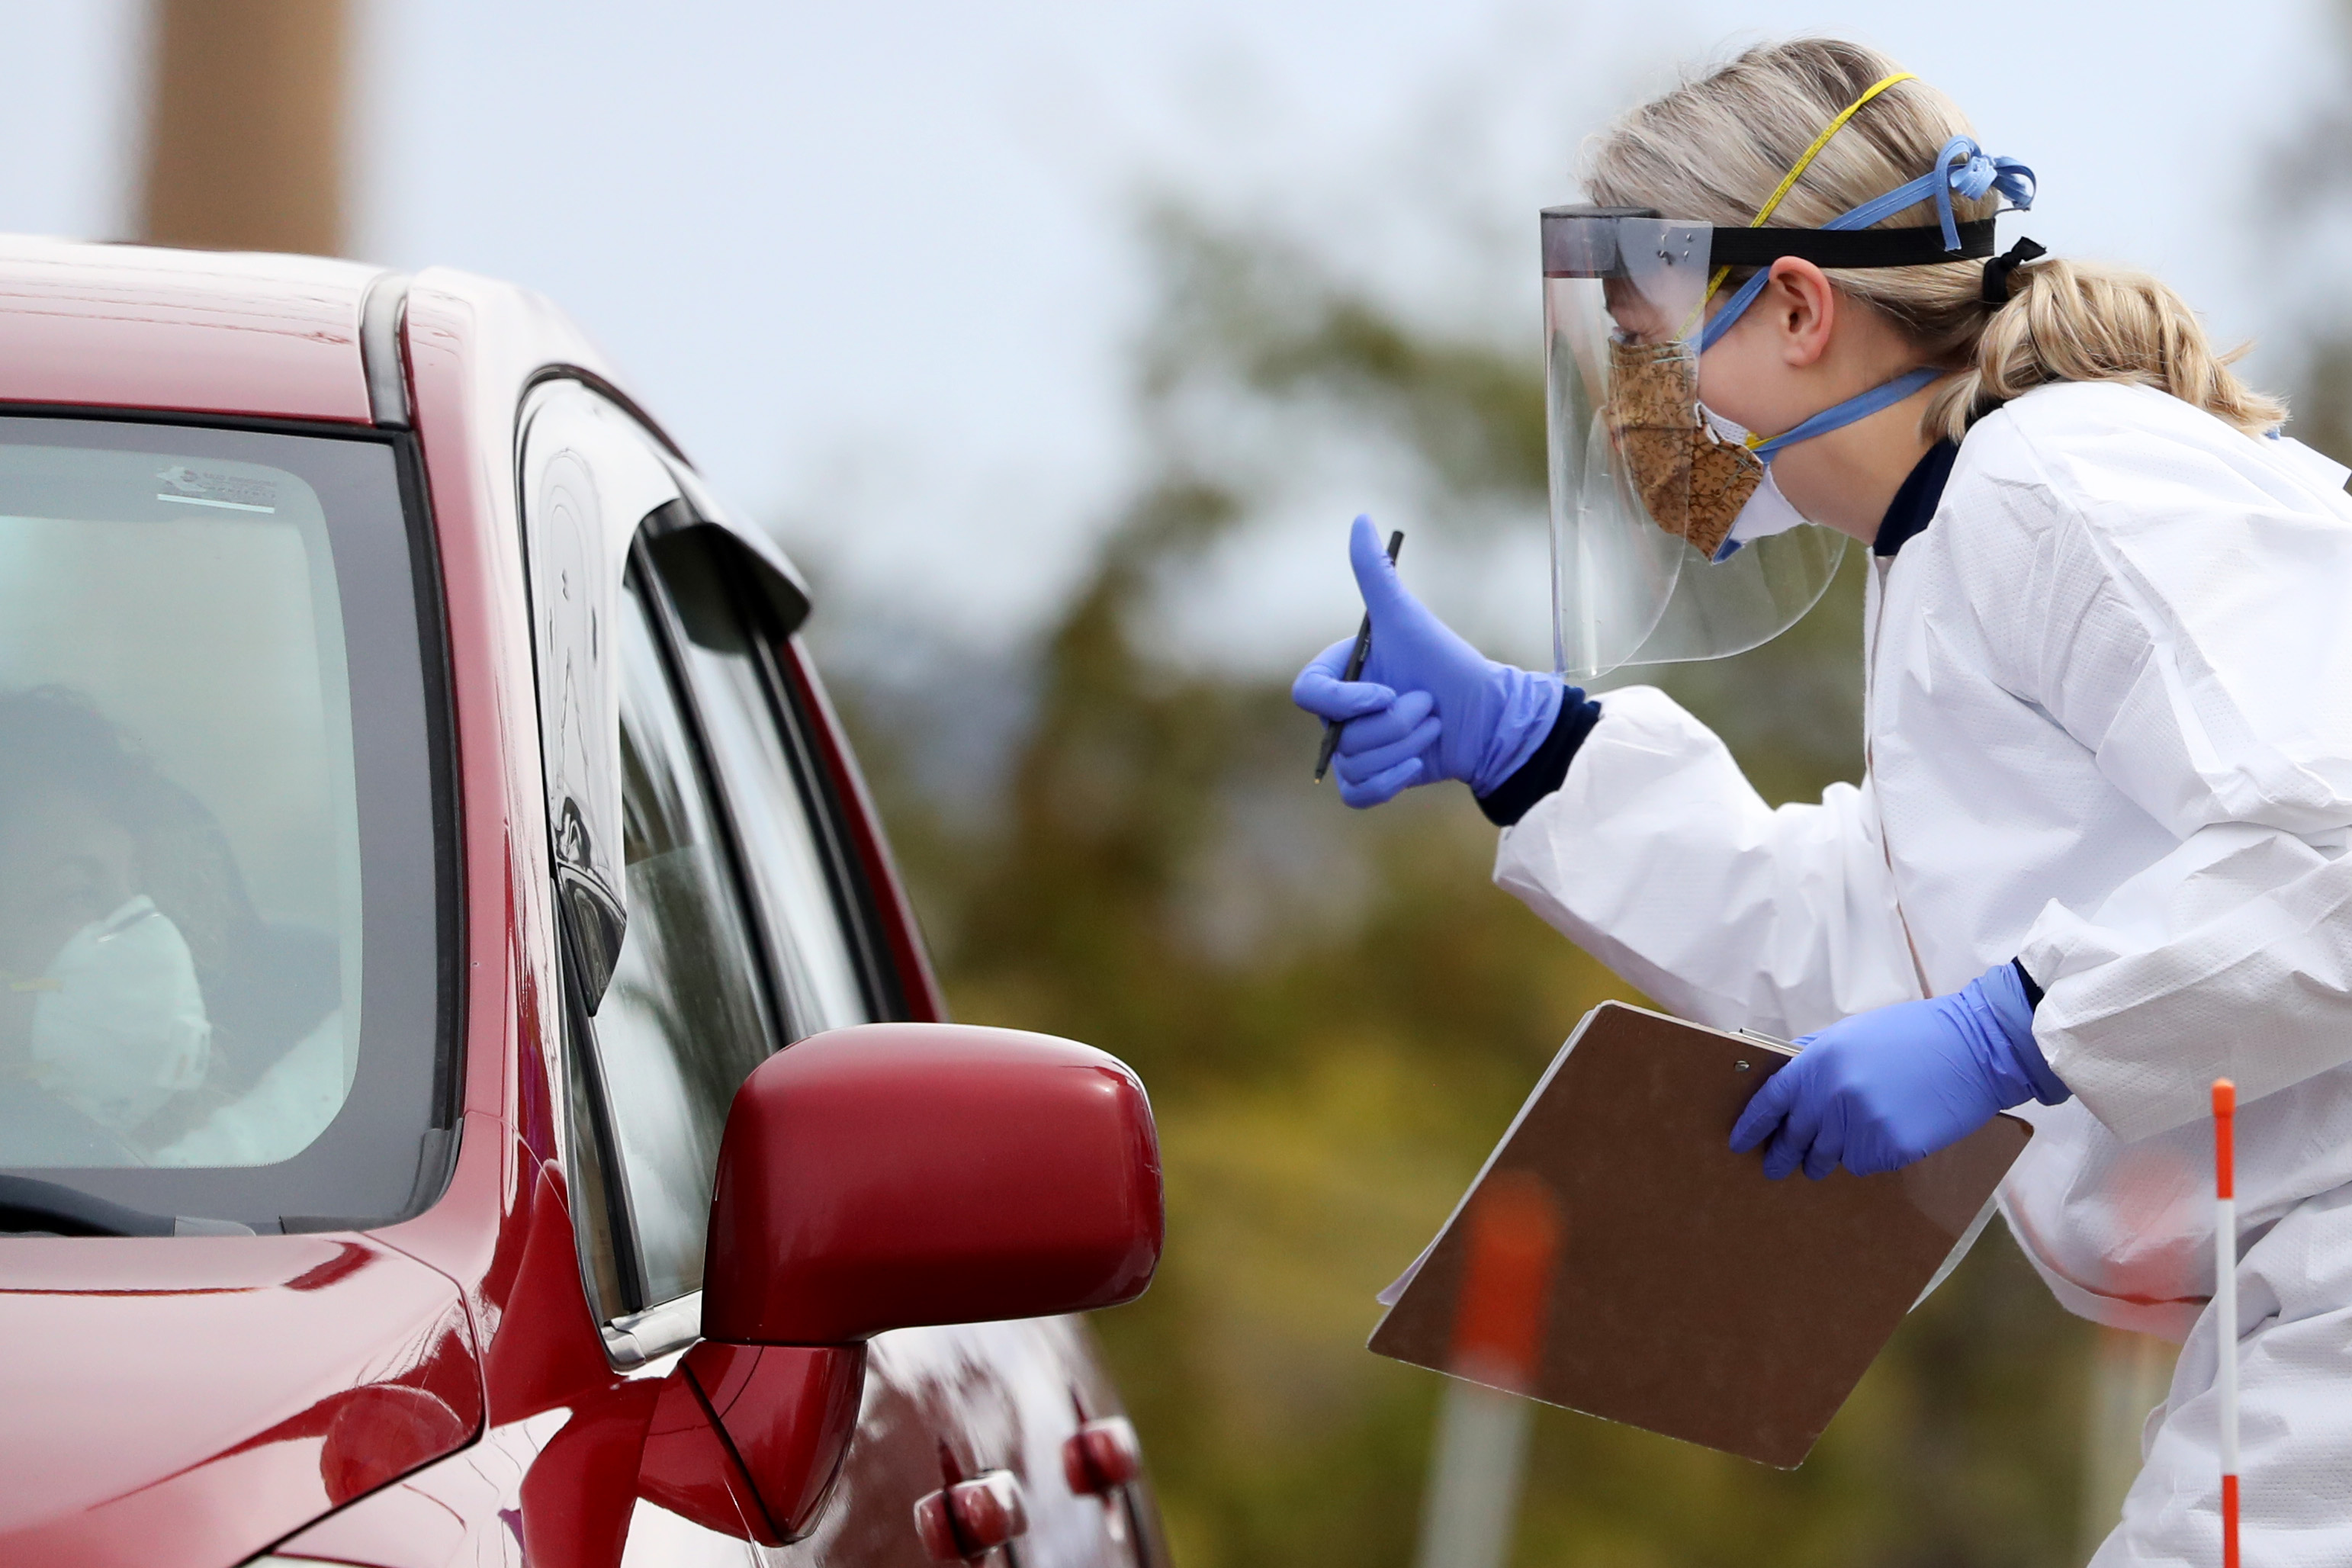 A medical professional works at a drive-thru coronavirus testing site at Cambridge Health Alliance Somerville Hospital in Somerville, Massachusetts, on April 28.